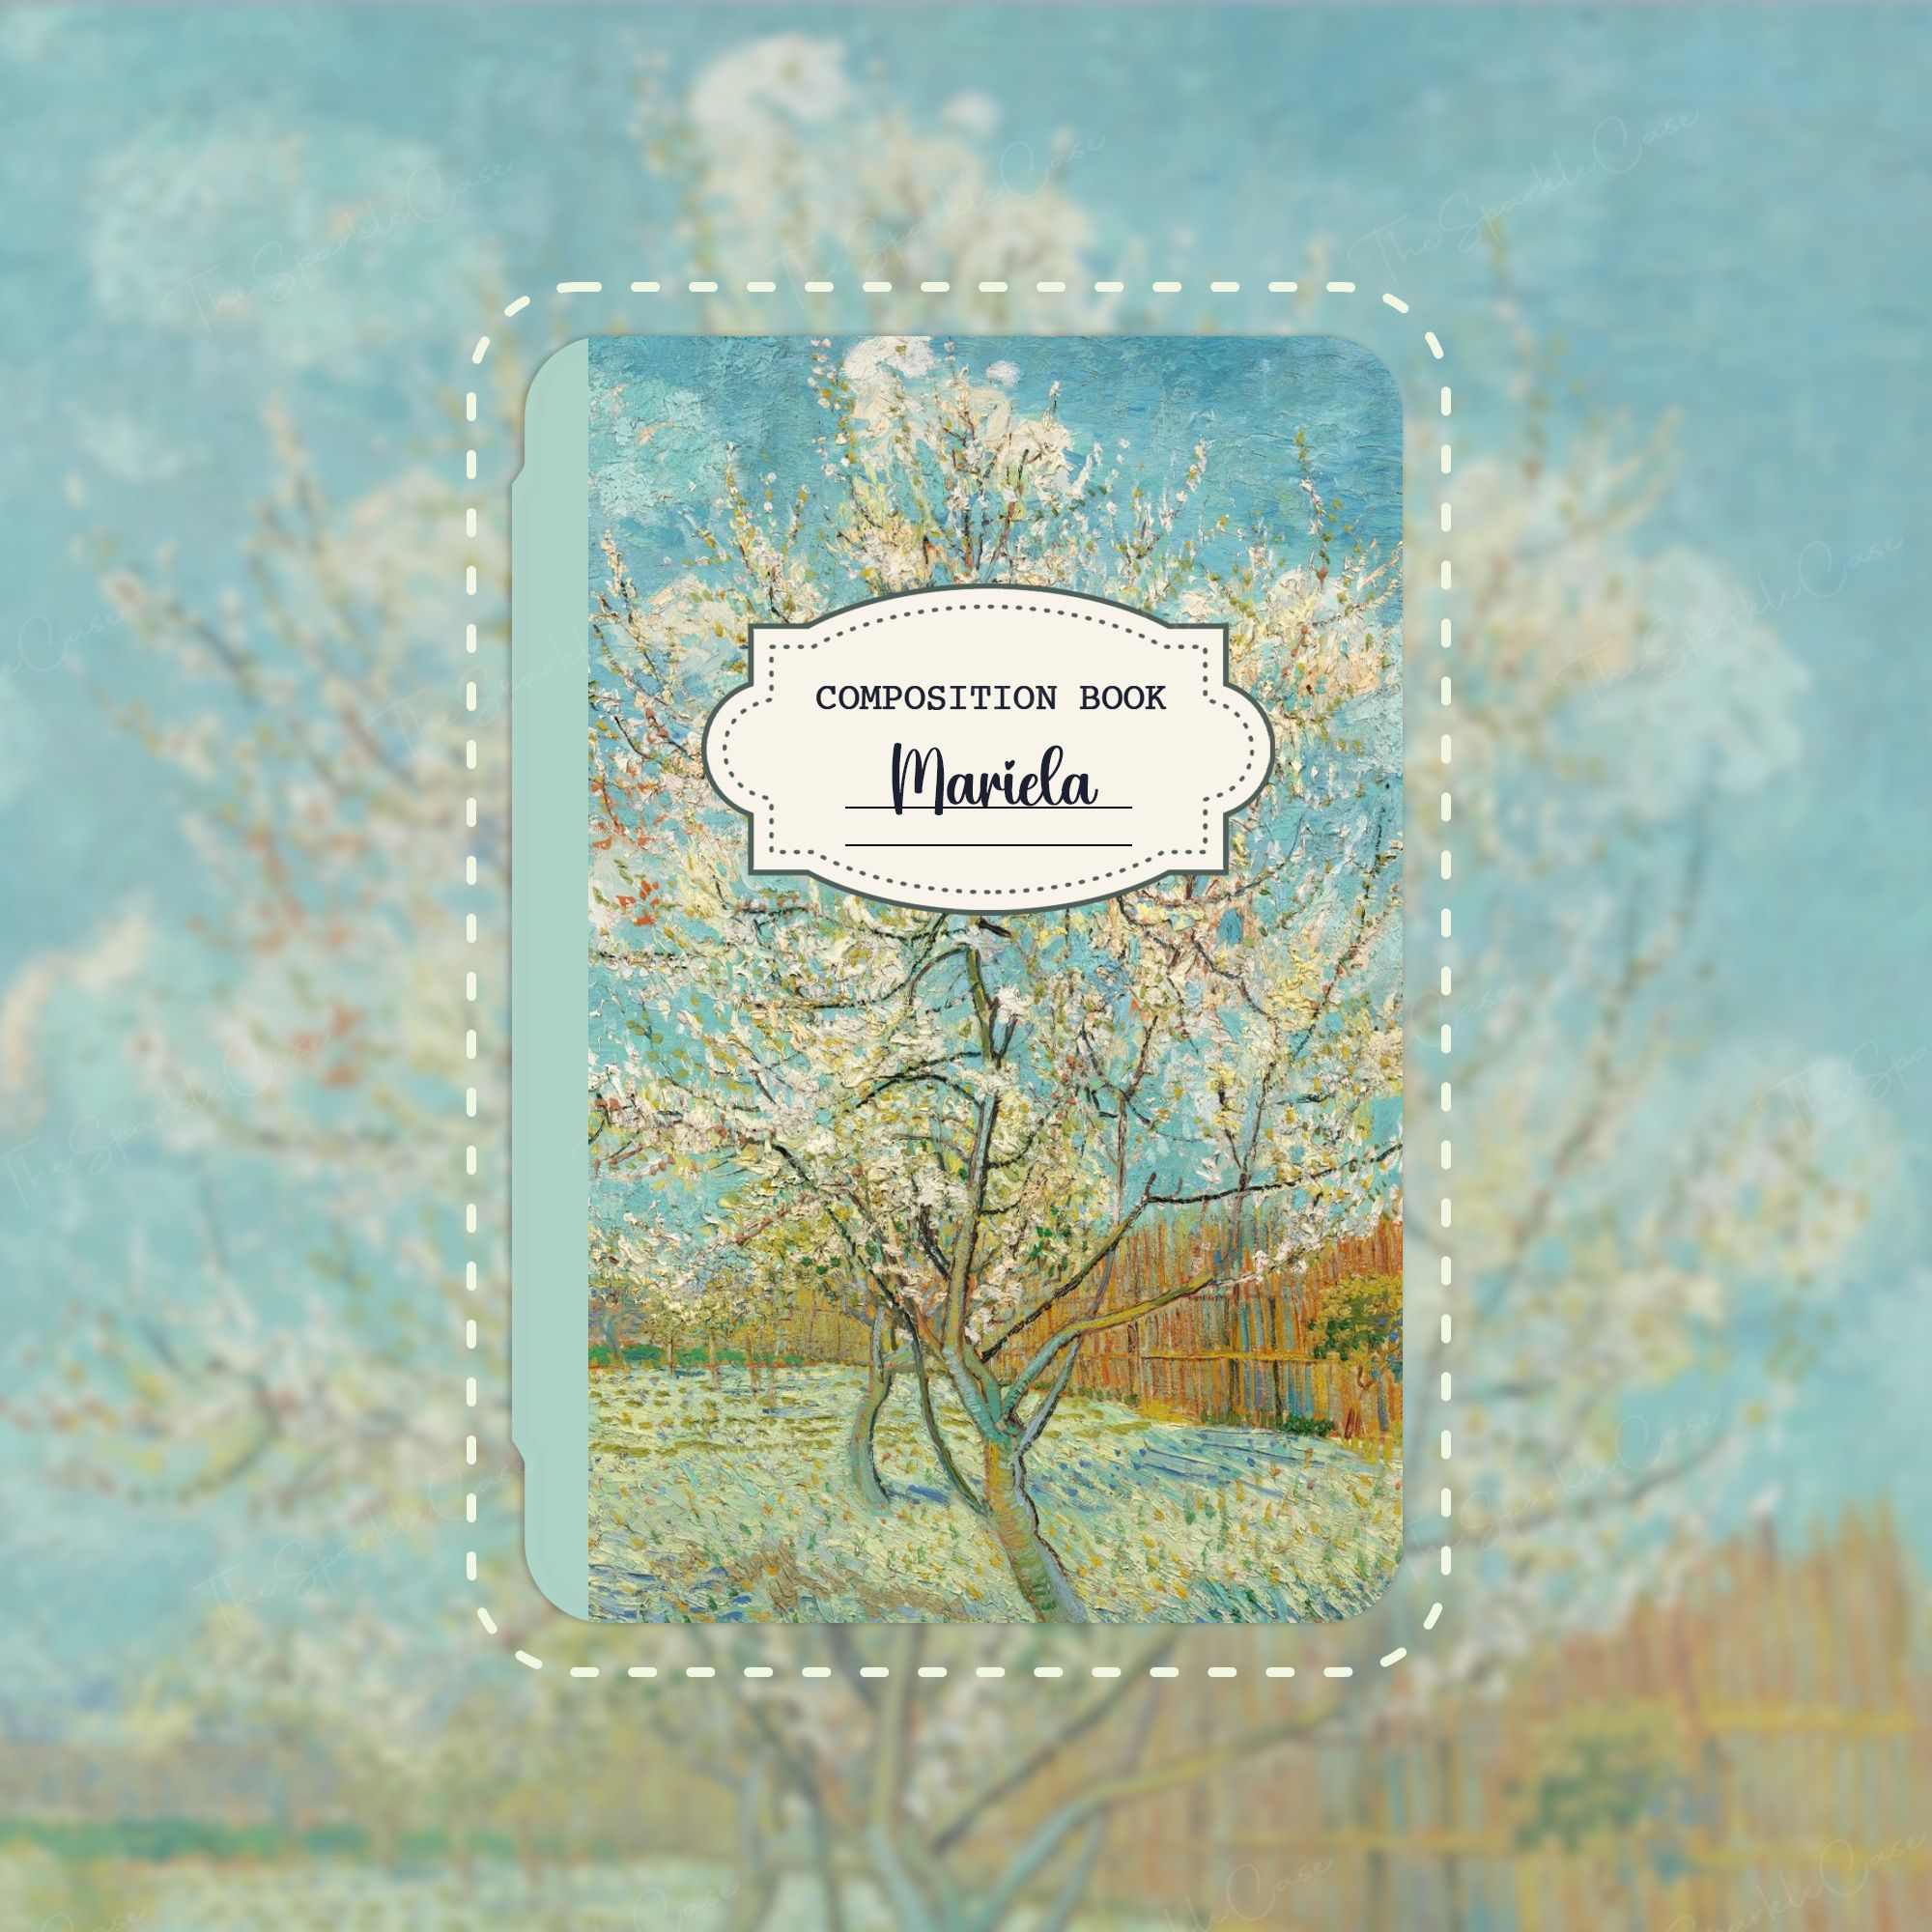 Van Gogh Composition Notebook Kindle Case Paperwhite Cover Free Personalization The Pink Peach Tree